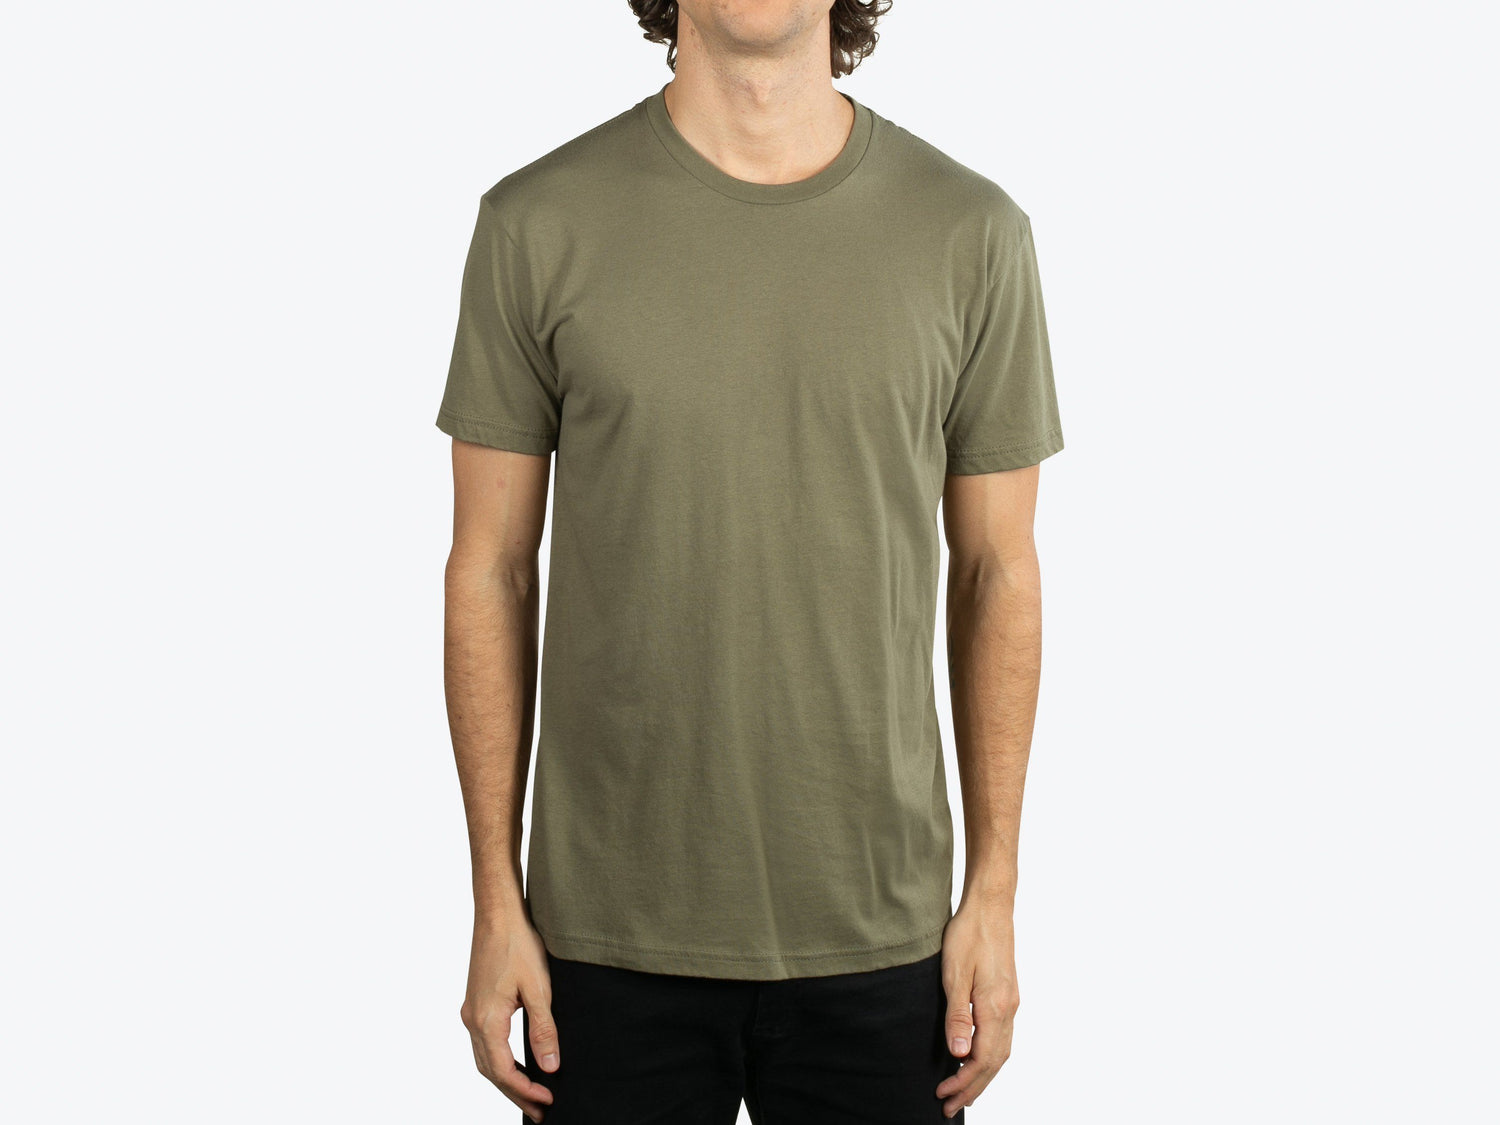 Next Level 3600 Military Green Multi Color 